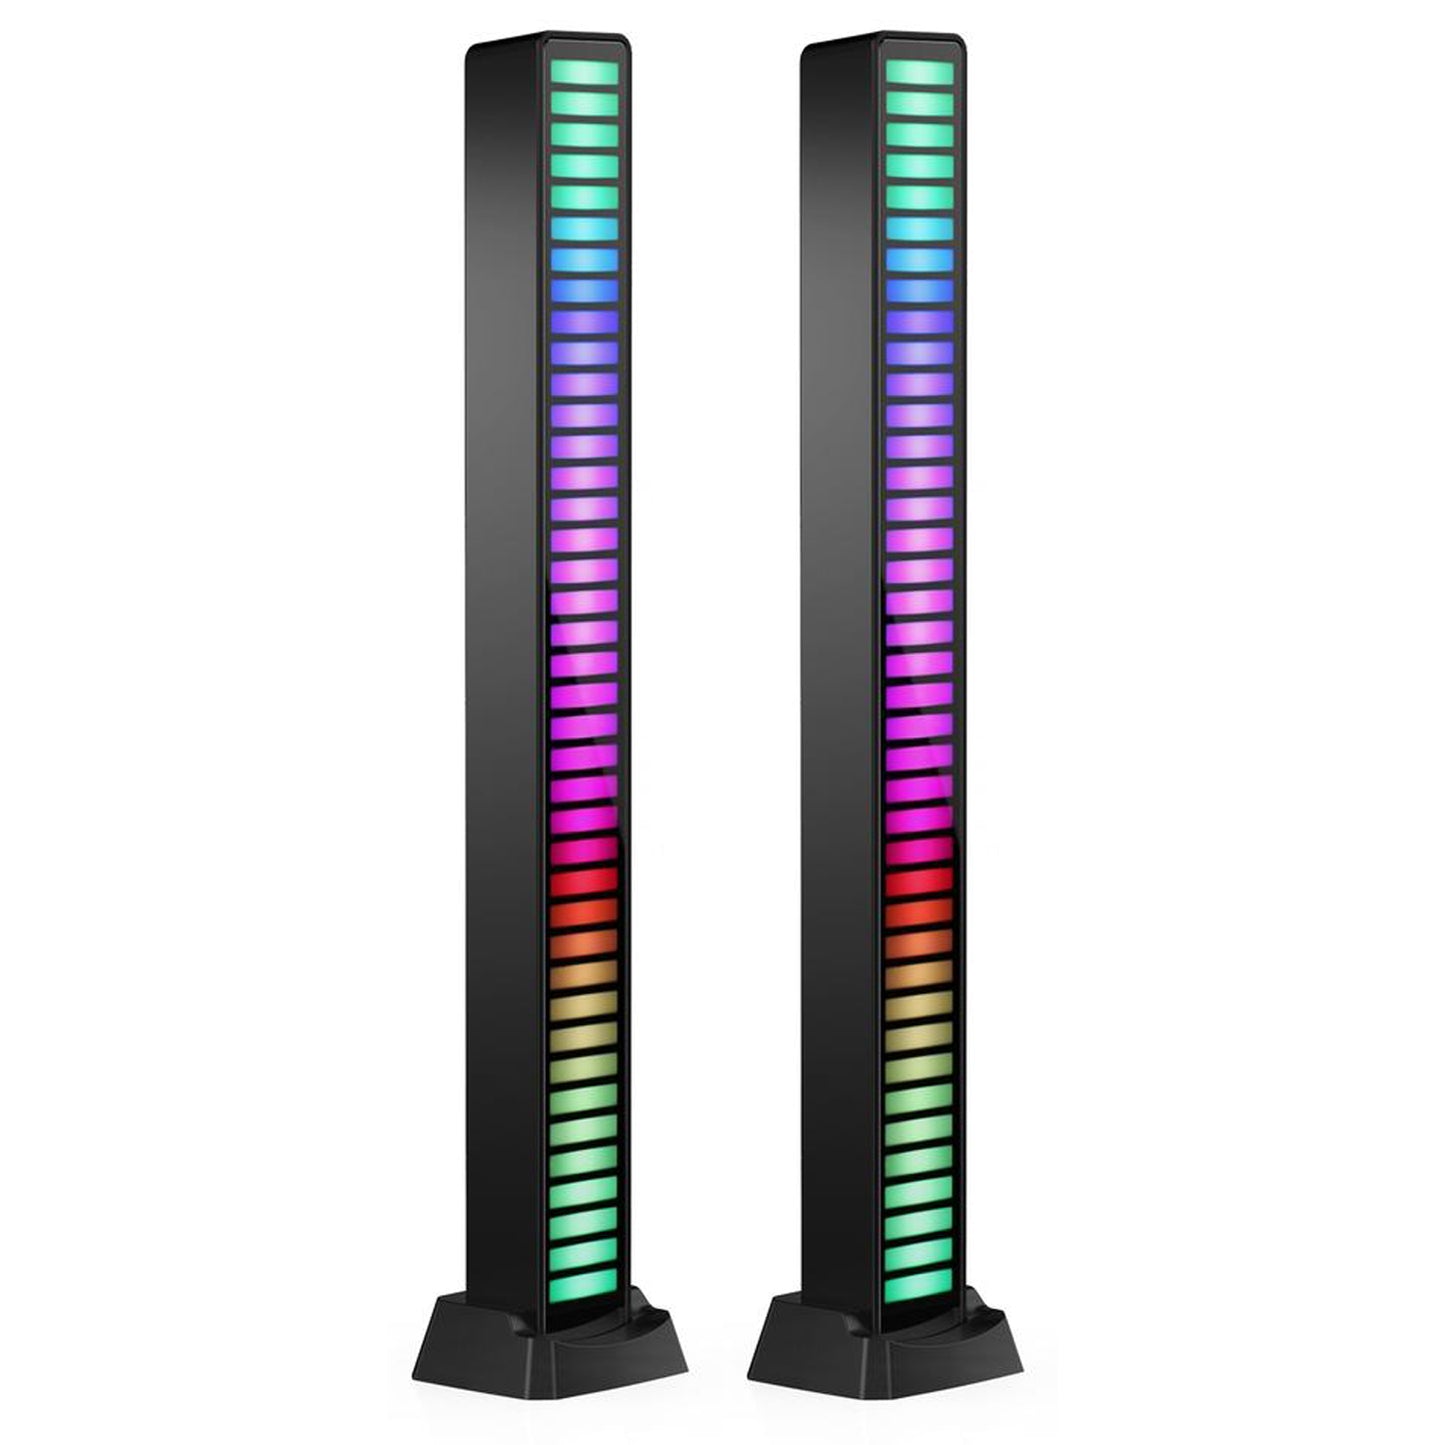 WRADER Rechargeable RGB Sound Control Voice-Activated Pickup Light Music Rhythm Light with Music Sync 32Bit Audio Spectrum Light for Car Desktop TV Gaming Led Light